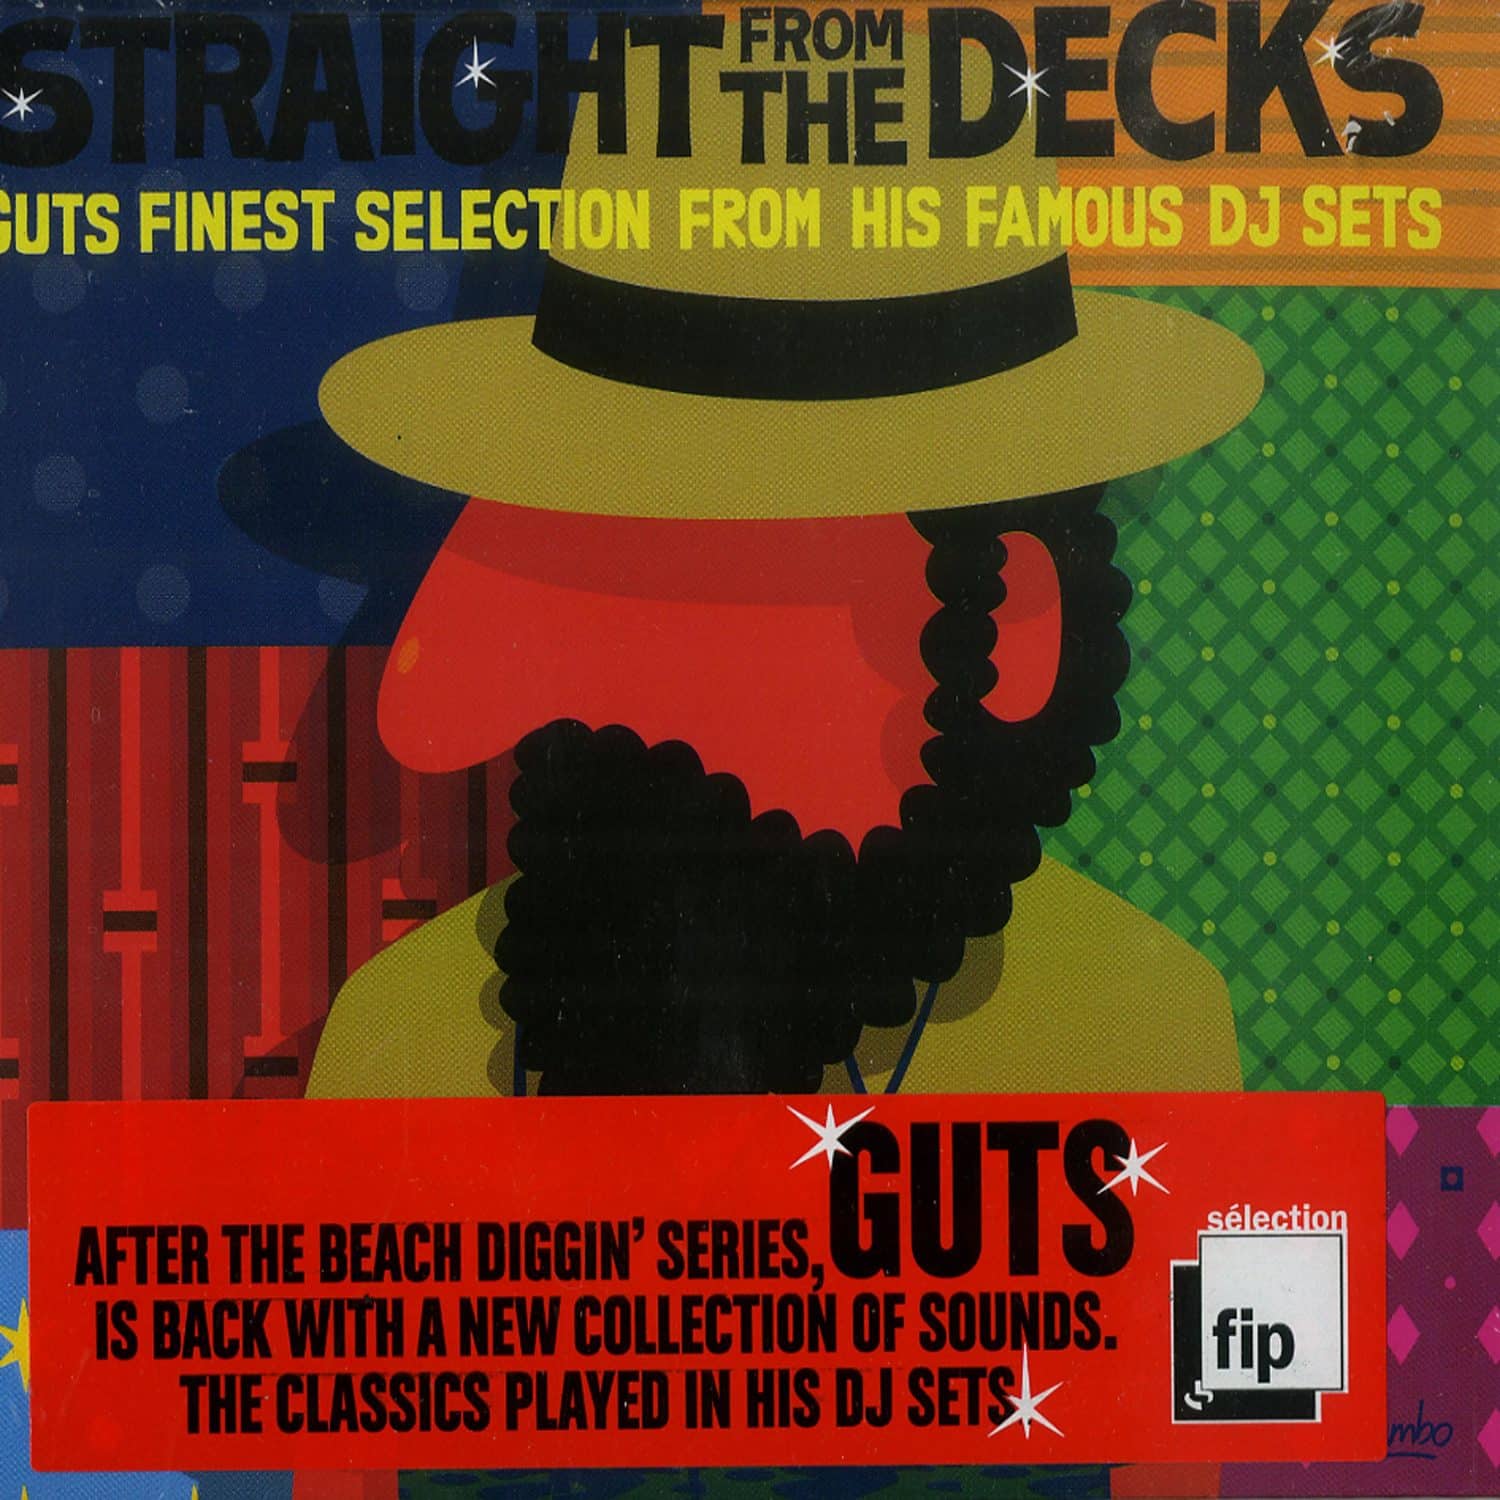 Guts - STRAIGHT FROM THE DECKS 